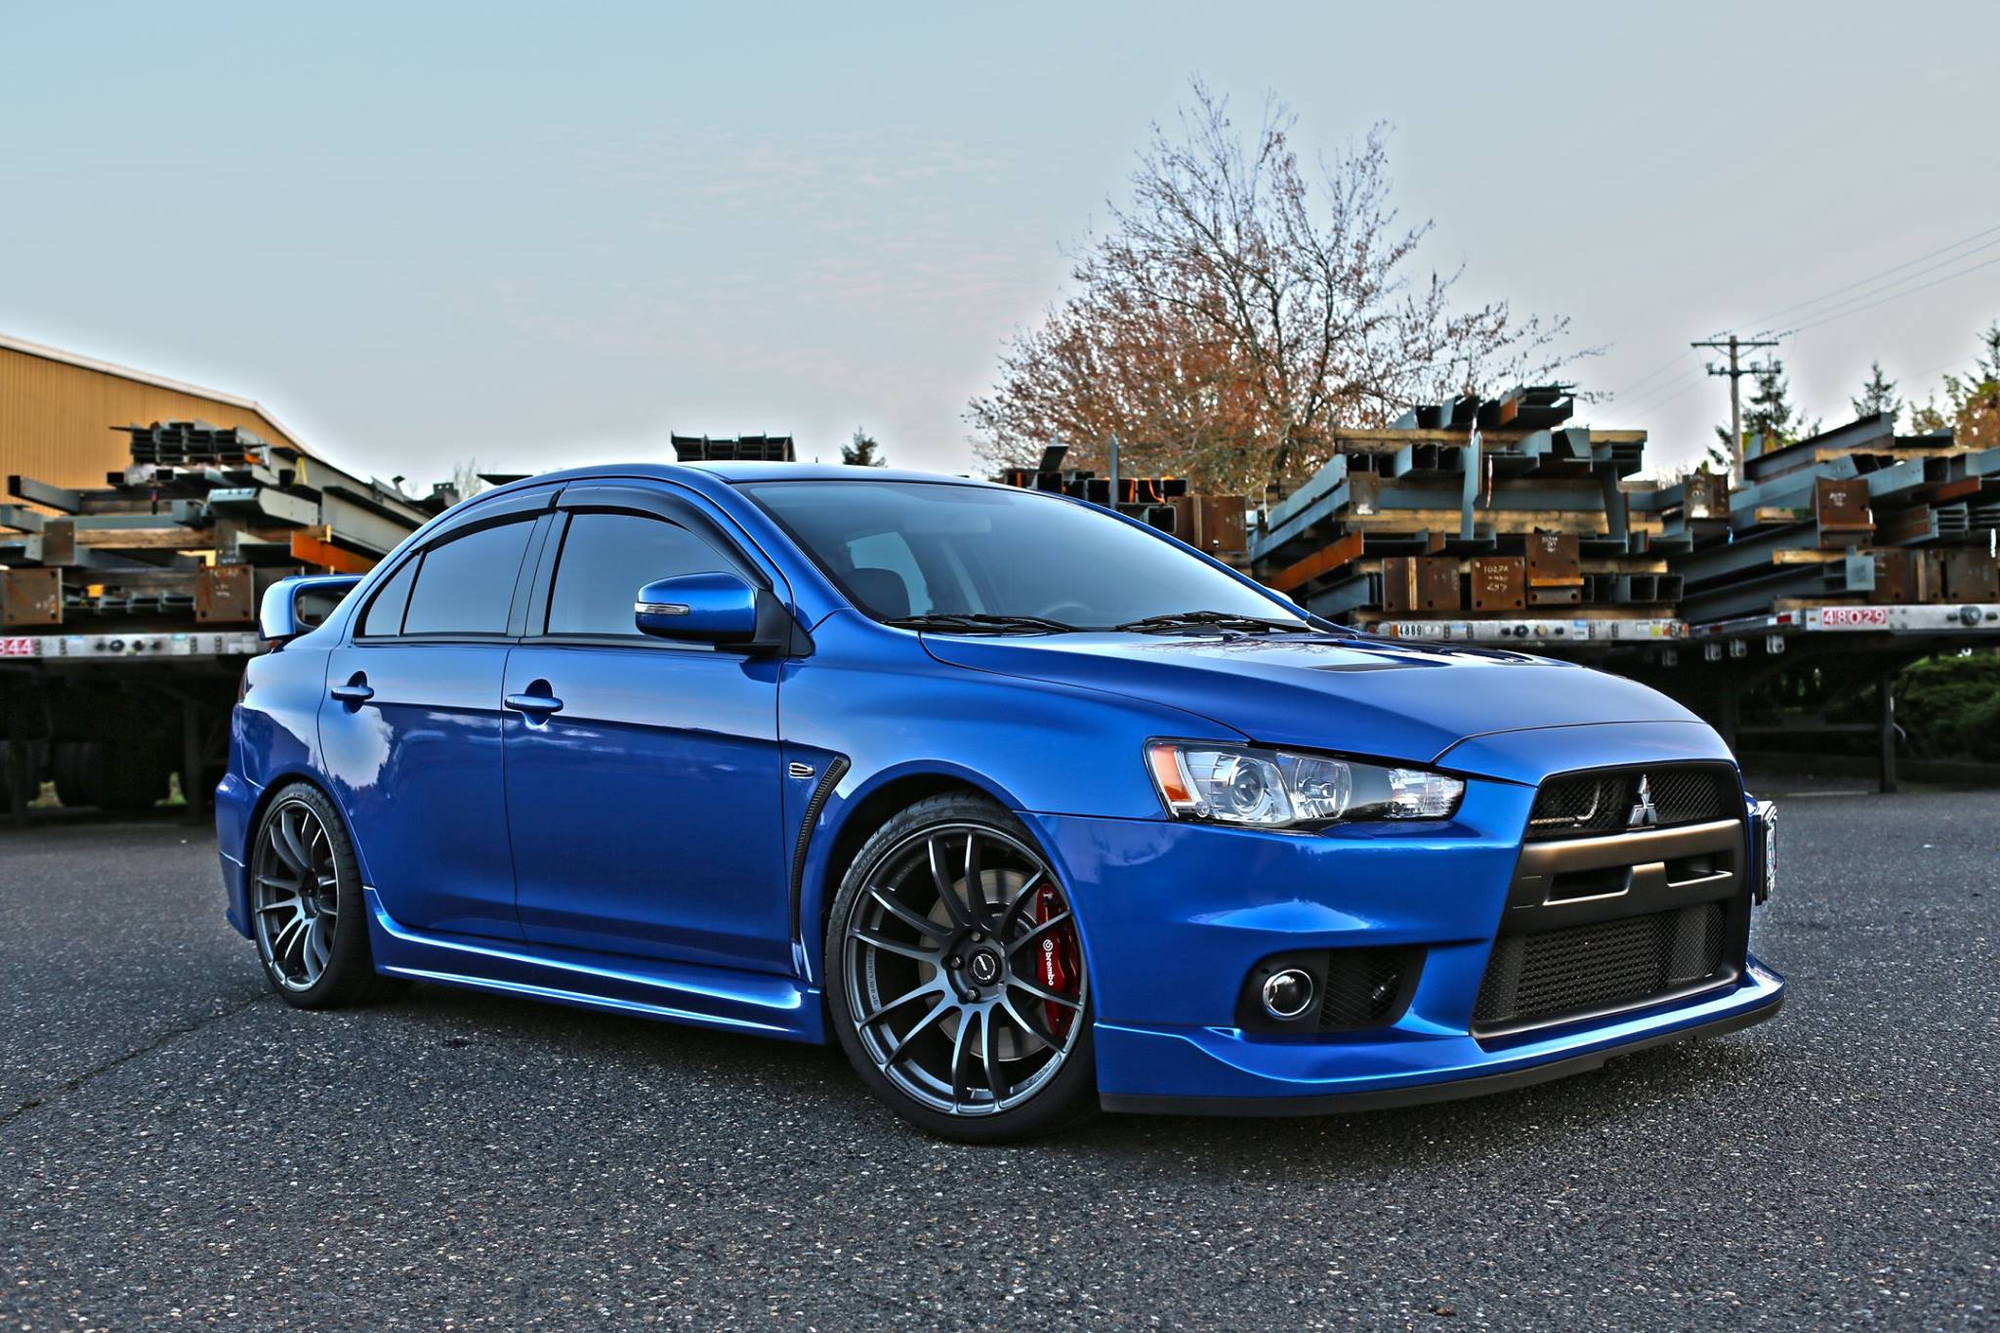 Download Official Octane Blue Evo X Picture Thread Page 70 Wallpaper HD. 